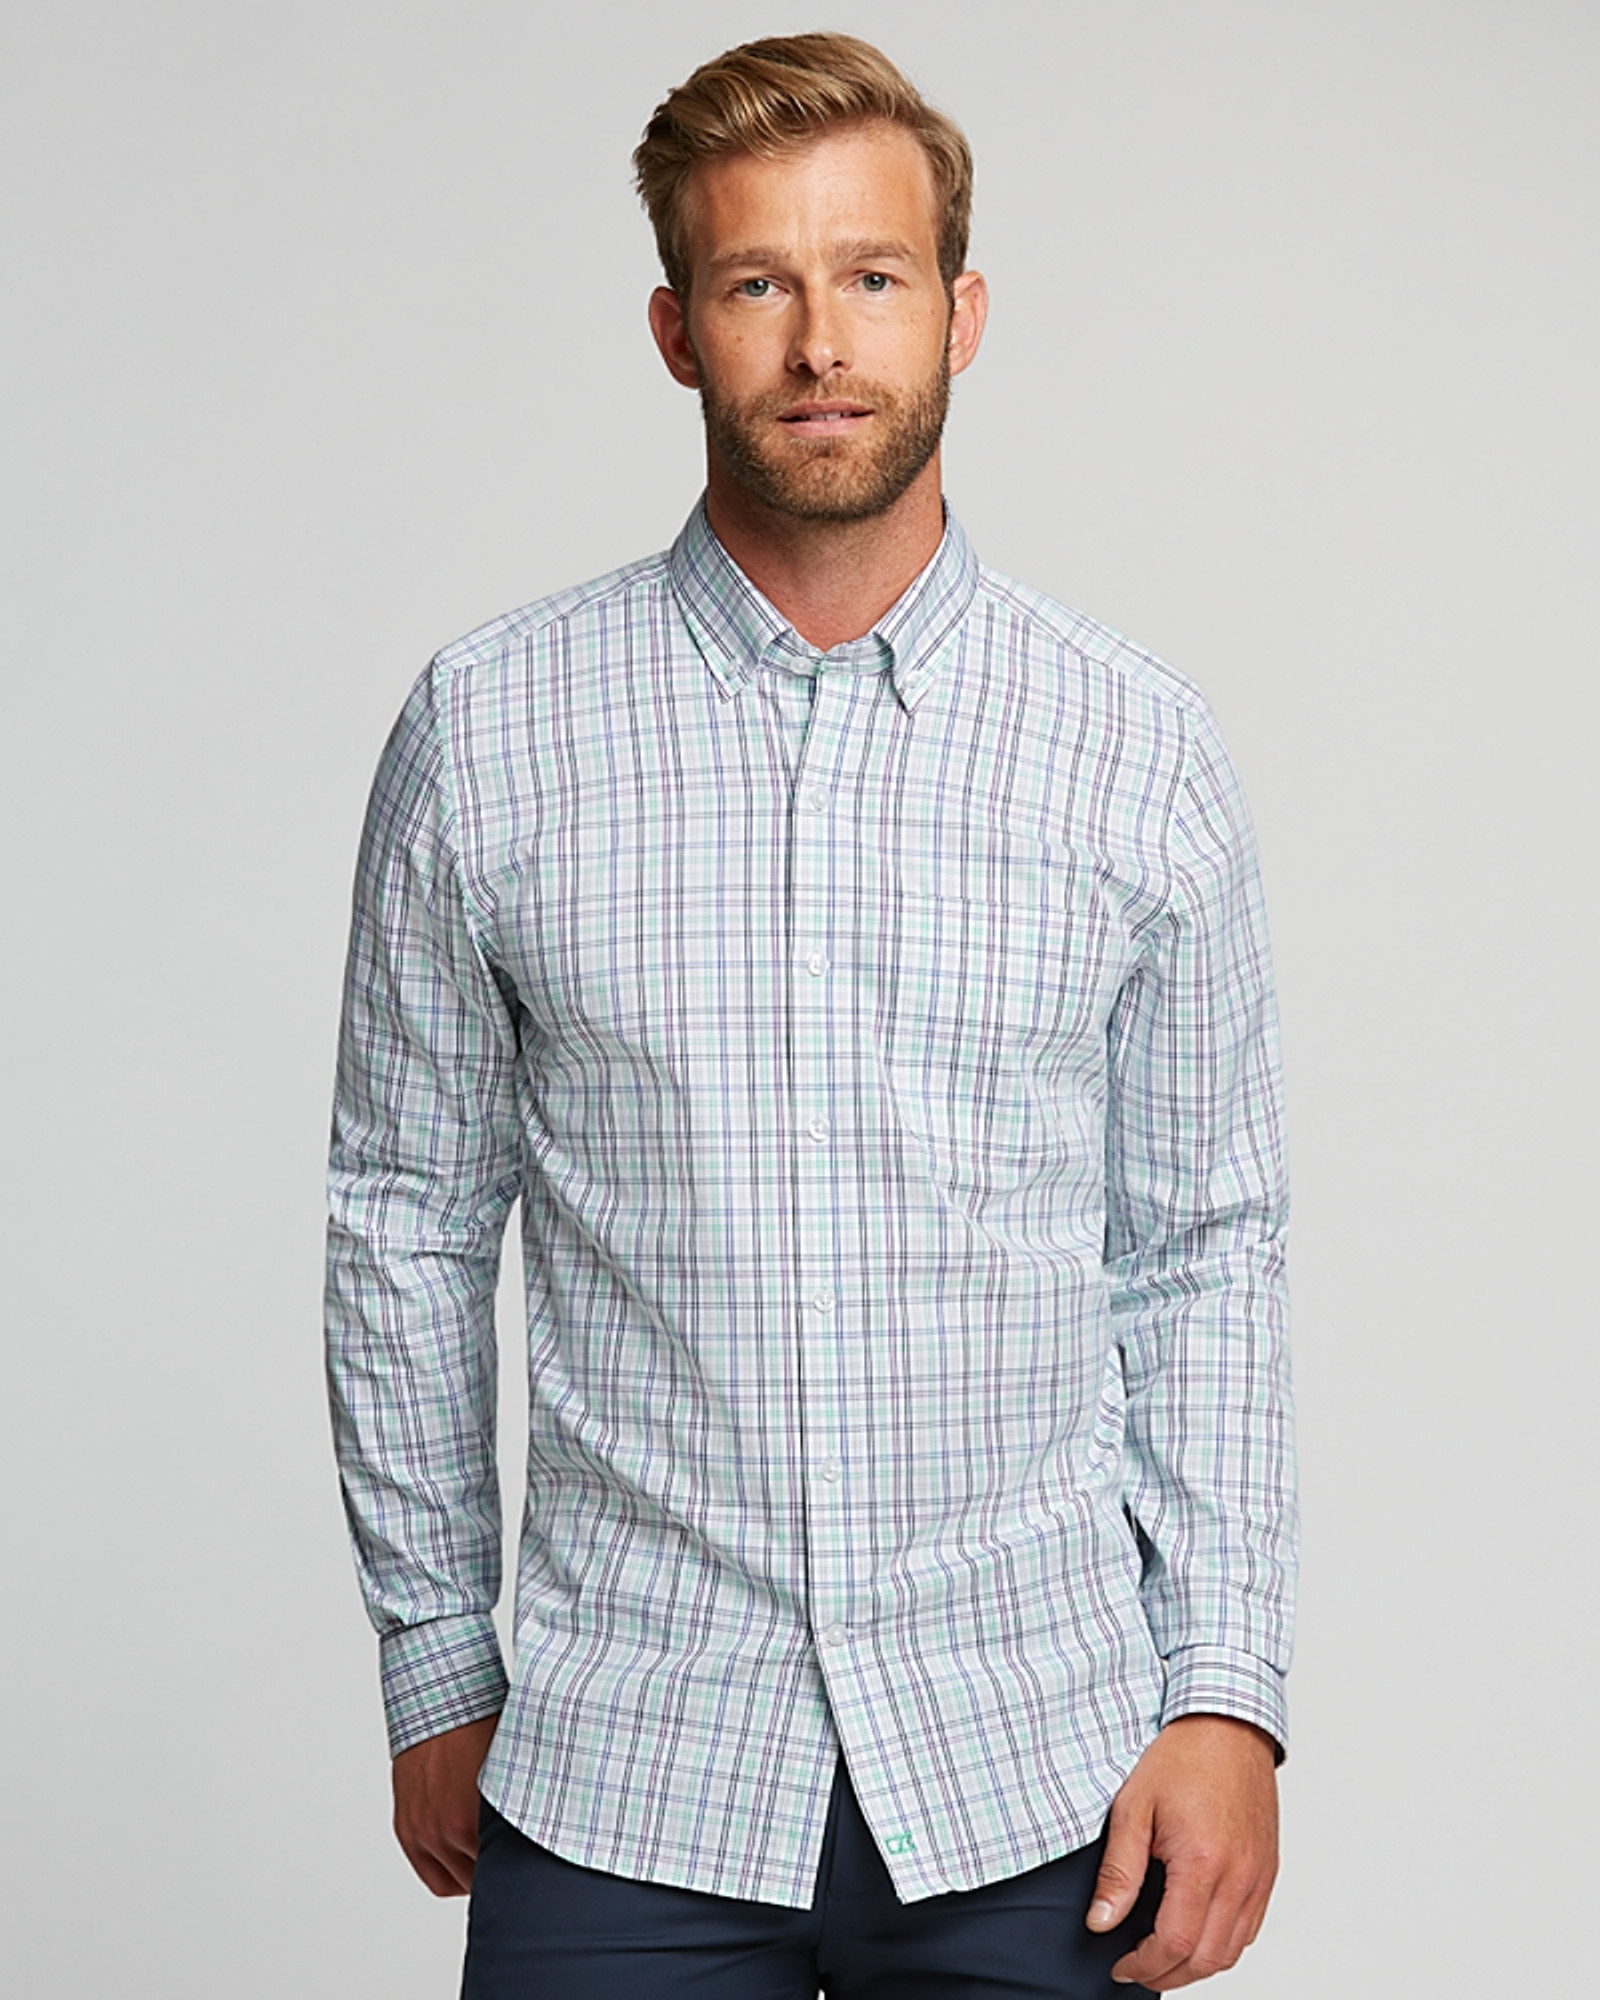 Cutter & Buck Anchor Multi Color Plaid Mens Tailored Fit Shirt